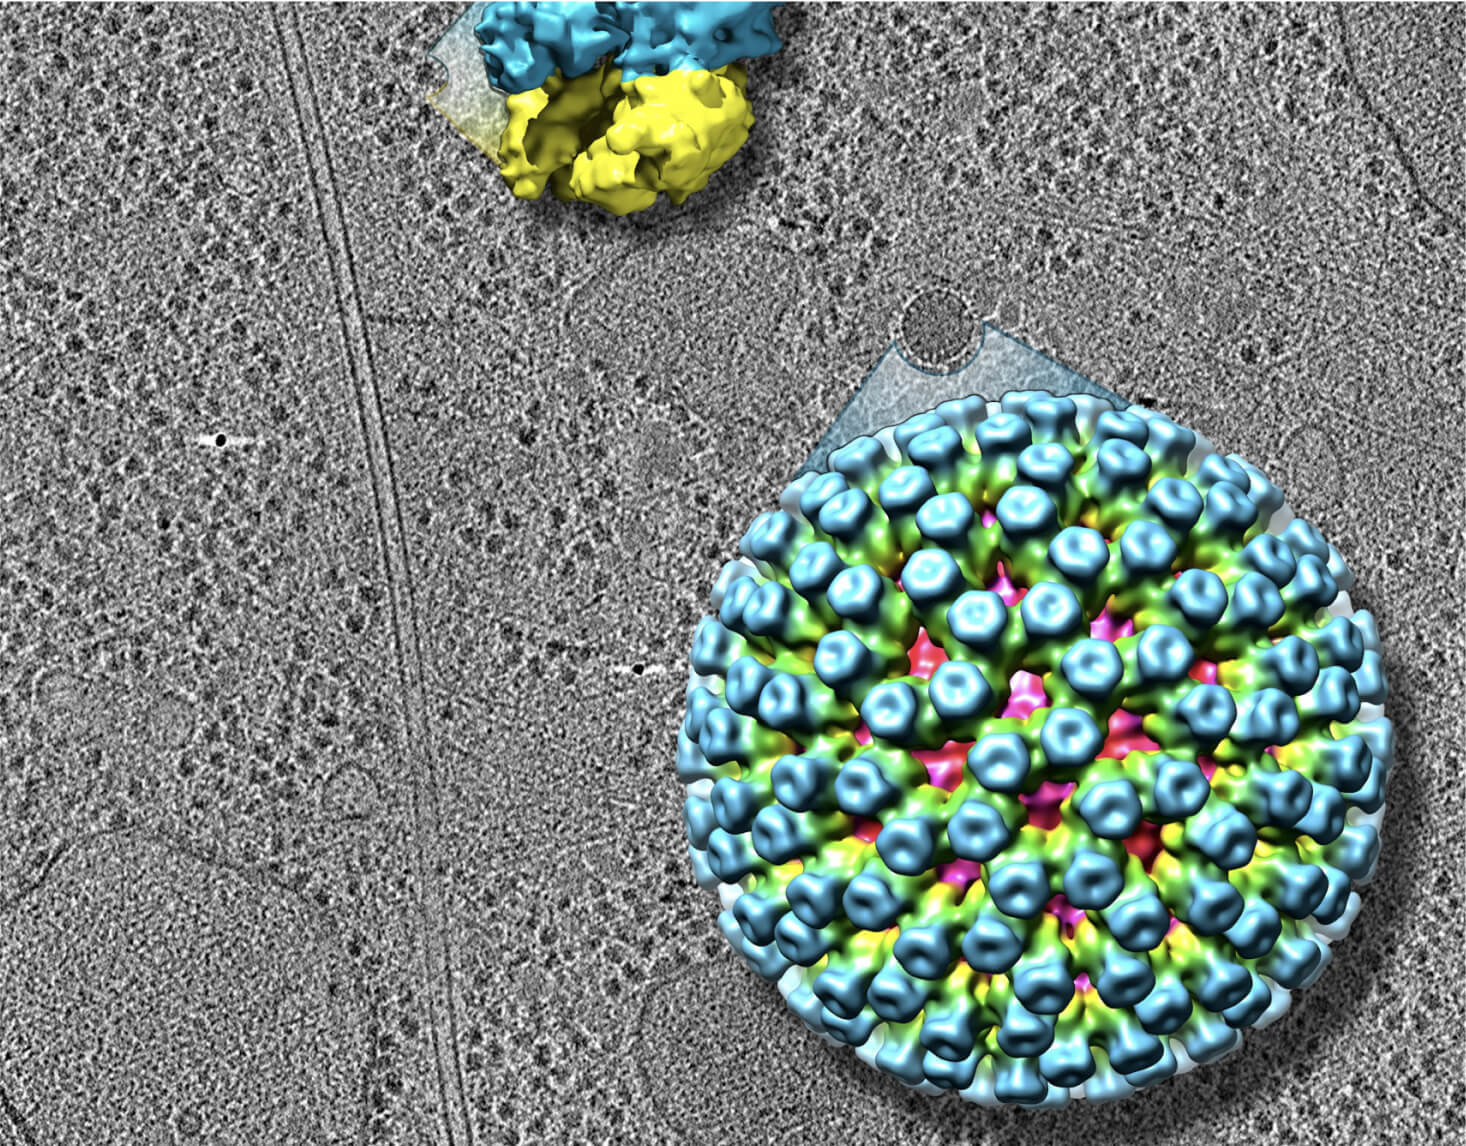 A cell slice imaged using cryo-ET, with a colored isosurface rendering depicting 3D structures of a rotavirus (bottom) and a ribosome protein (top).